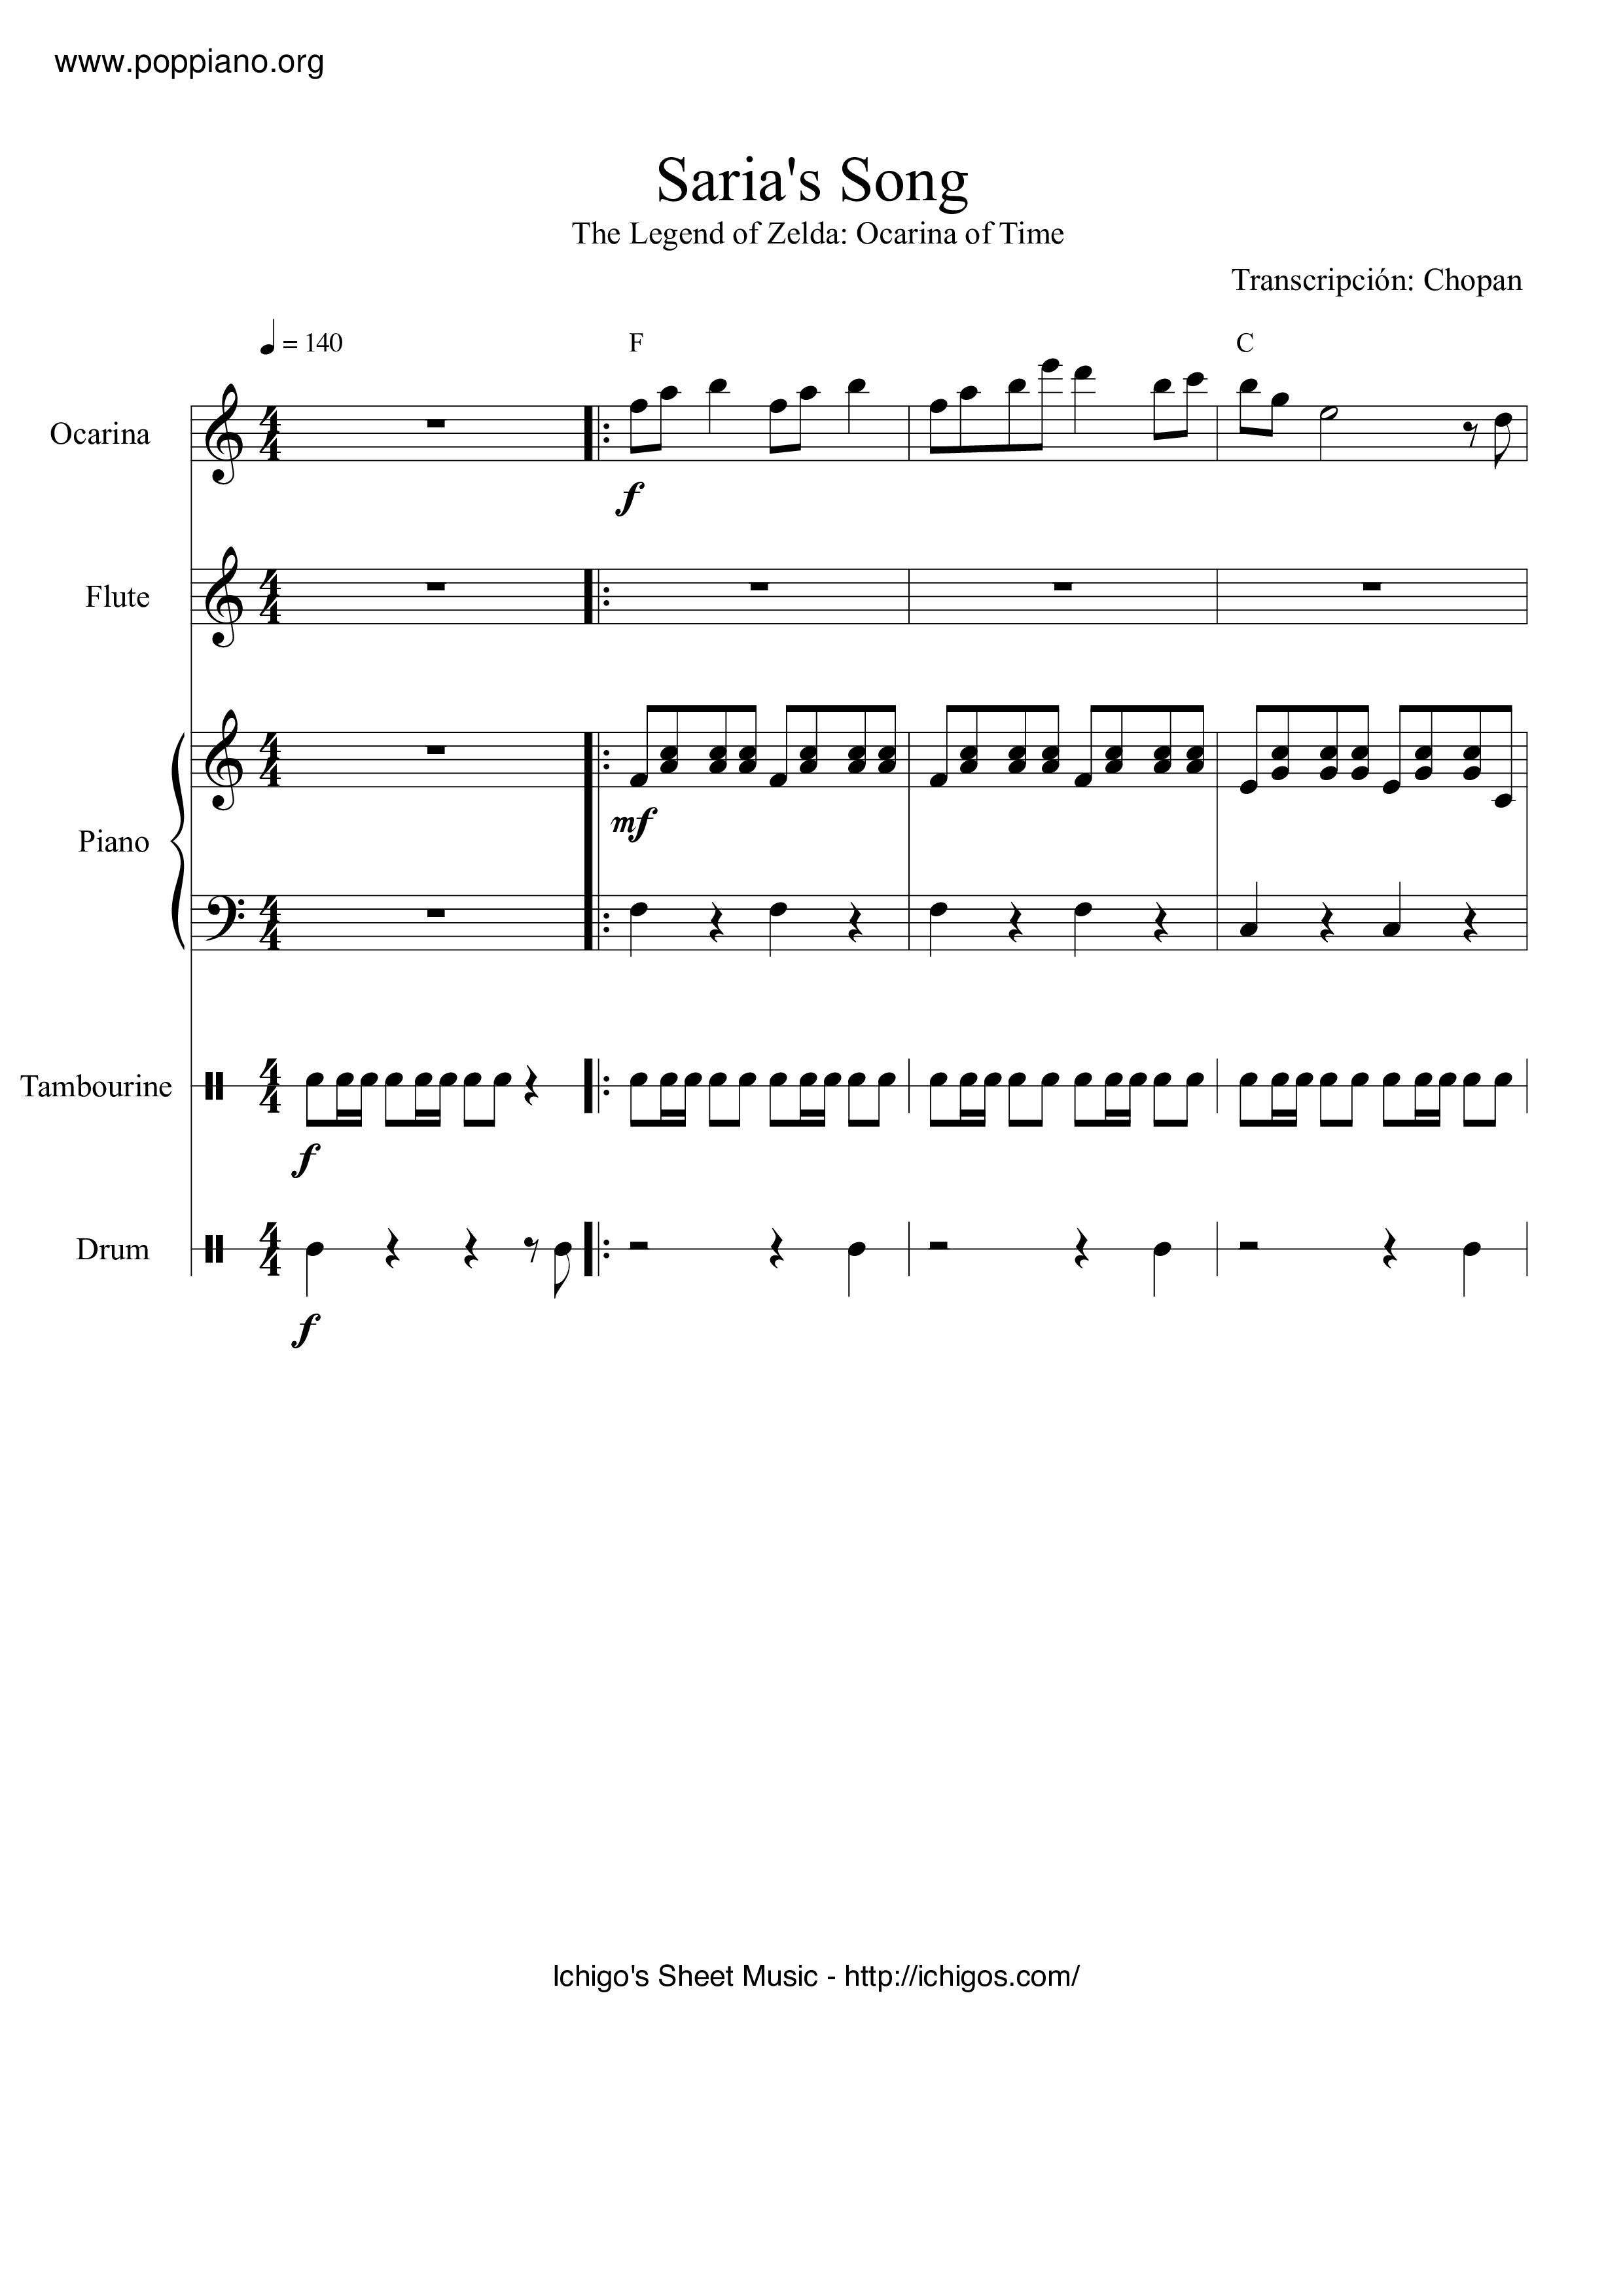 The Legend Of Zelda Ocarina Of Time Sarias Songlost Woods Sheet Music Pdf Free Score Download ★ 